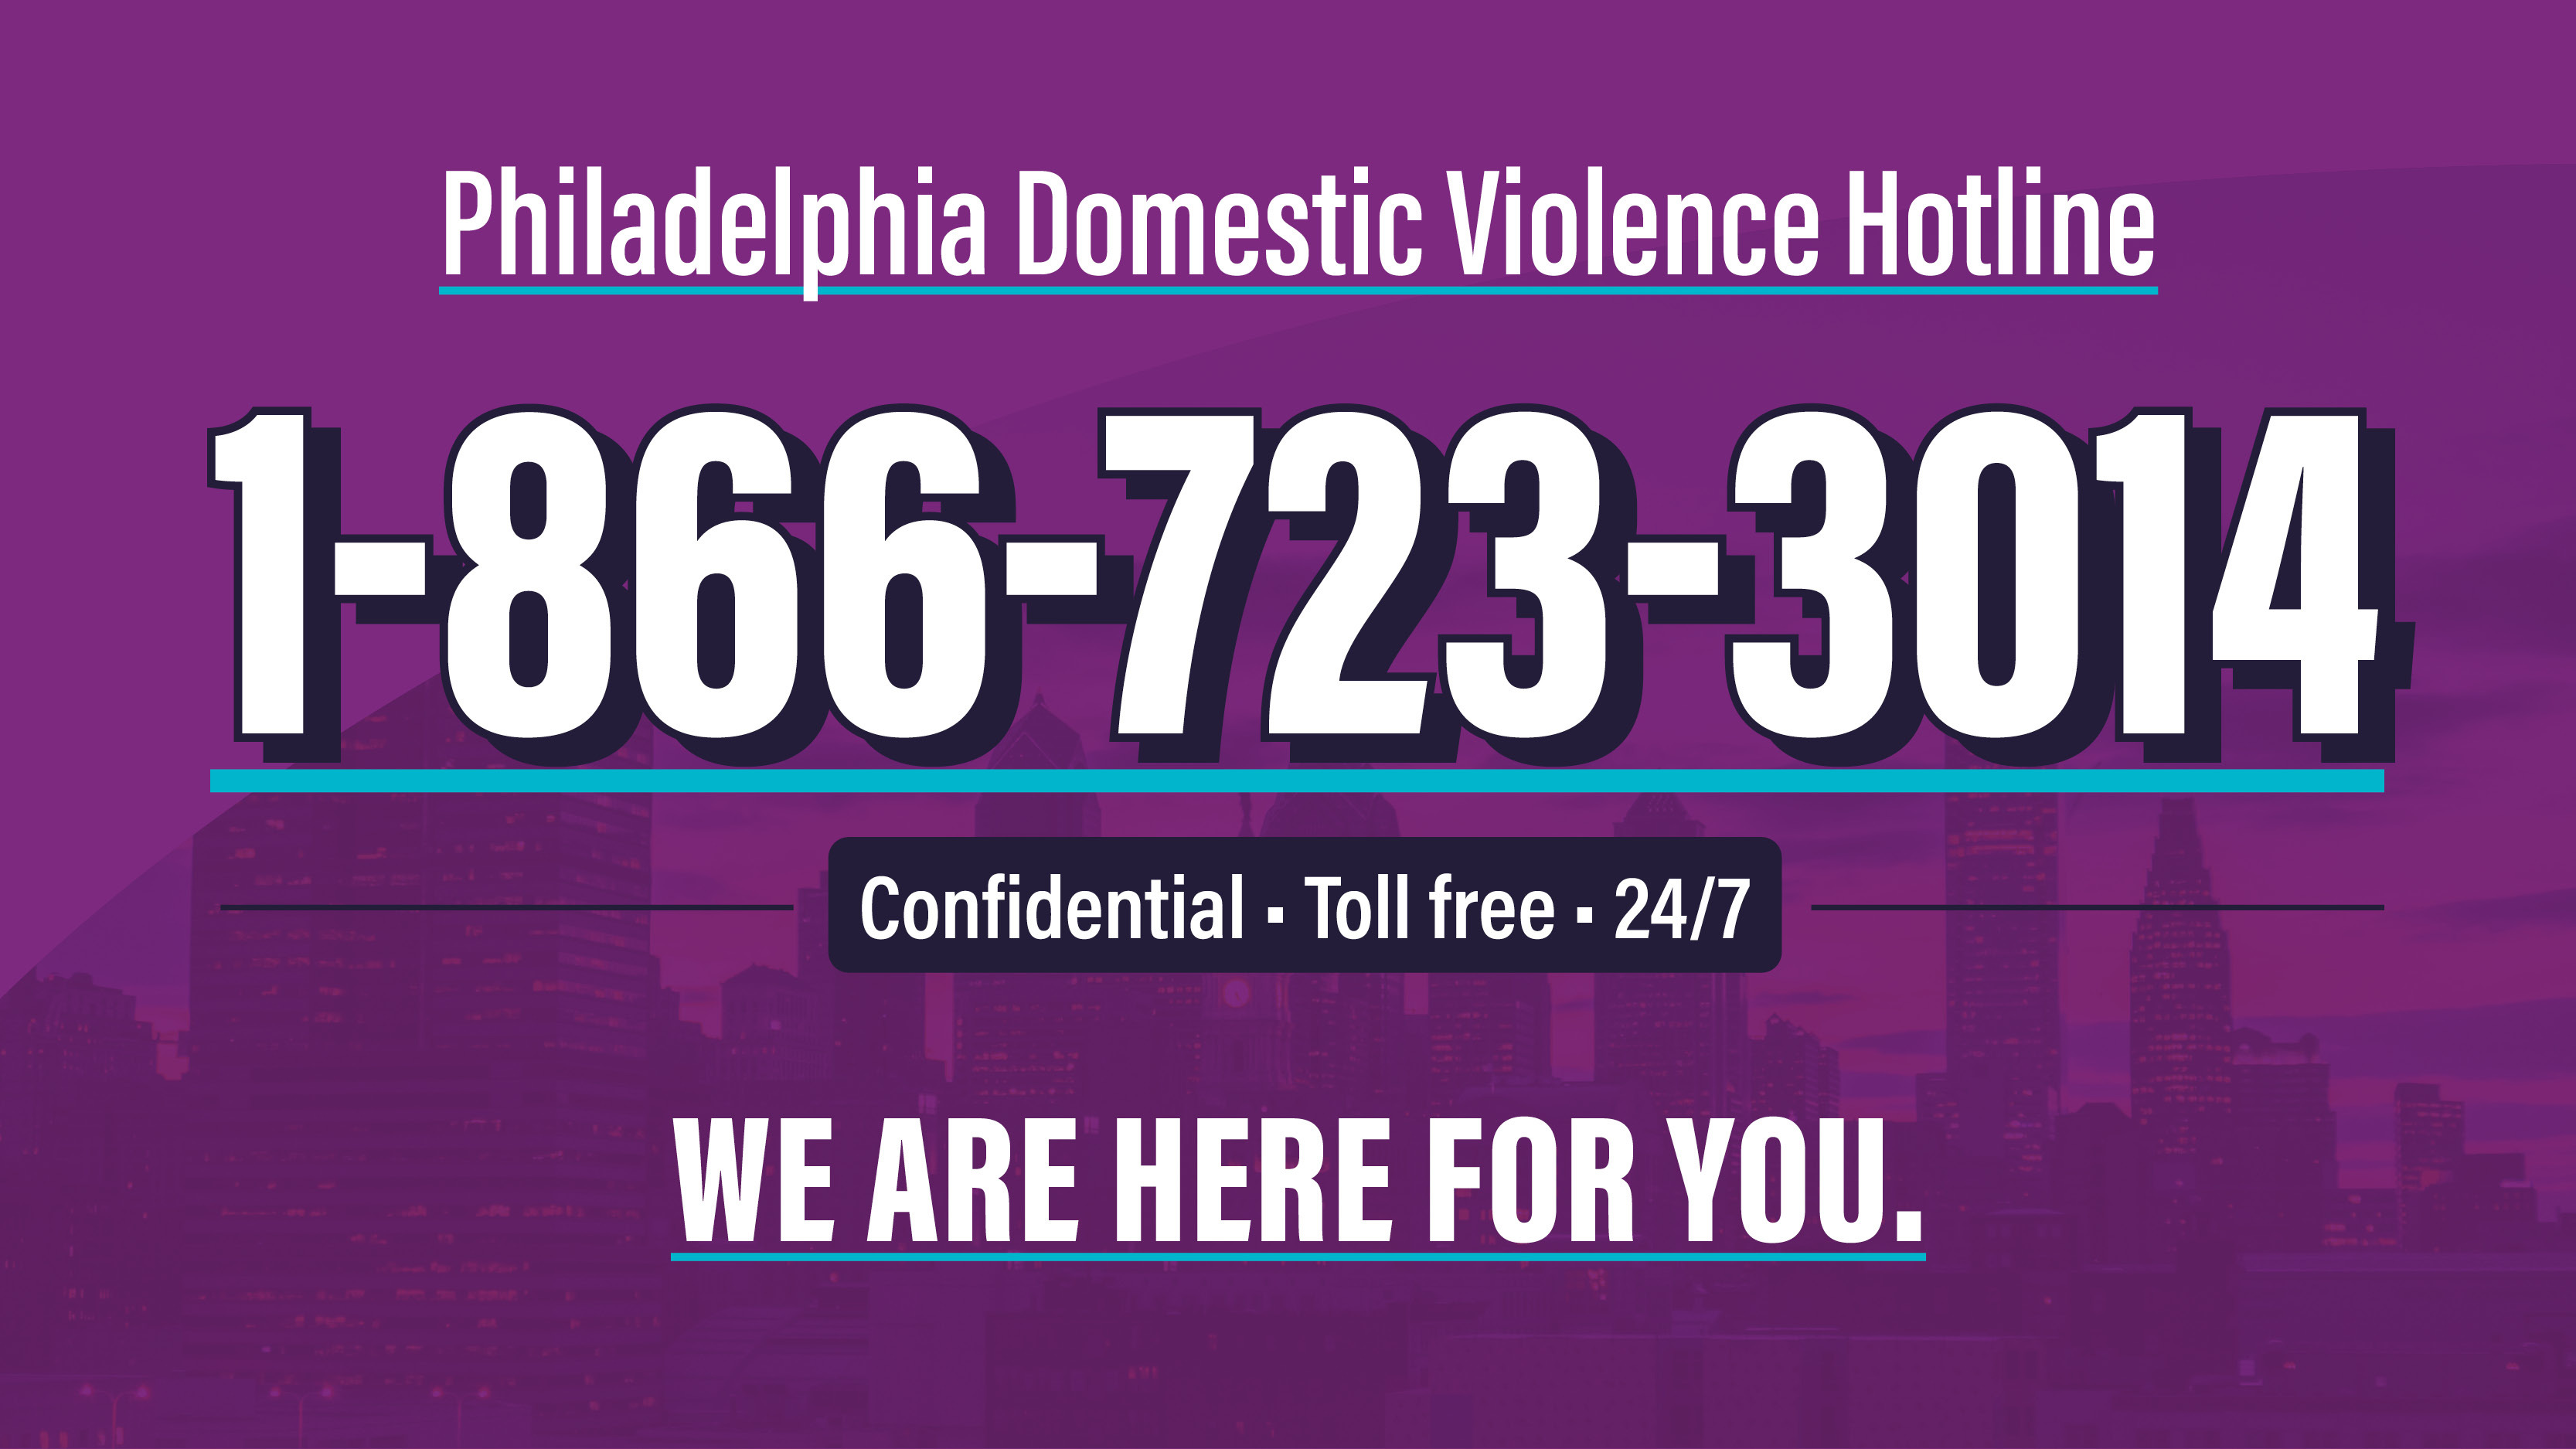 A graphic promoting the Philadelphia Domestic Violence Hotline: 1-866-723-3014. Confidential. Toll-Free. 24/7. We are here for you.